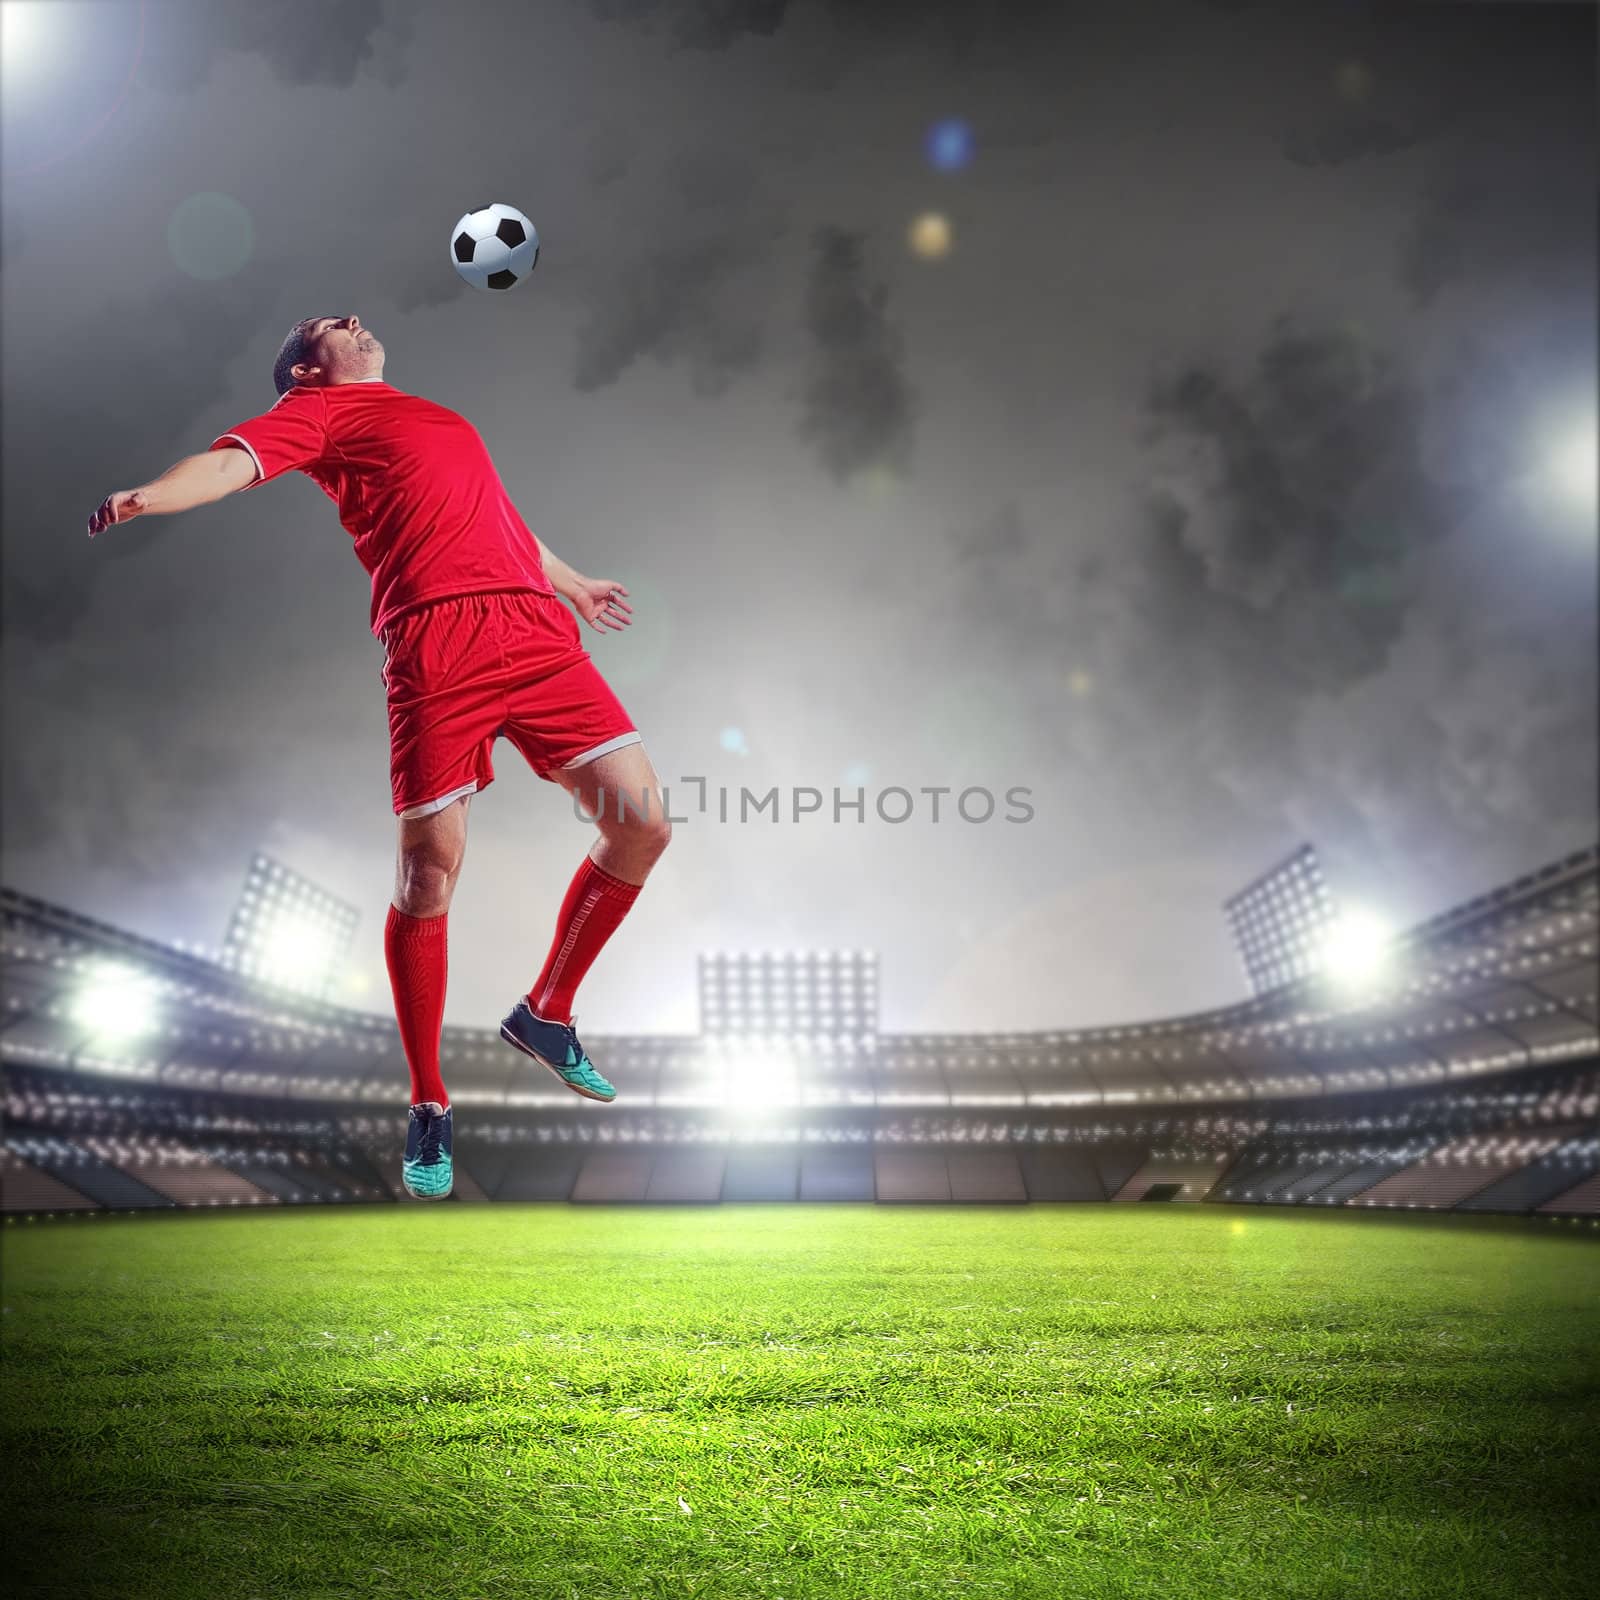 football player in red shirt striking the ball at the stadium